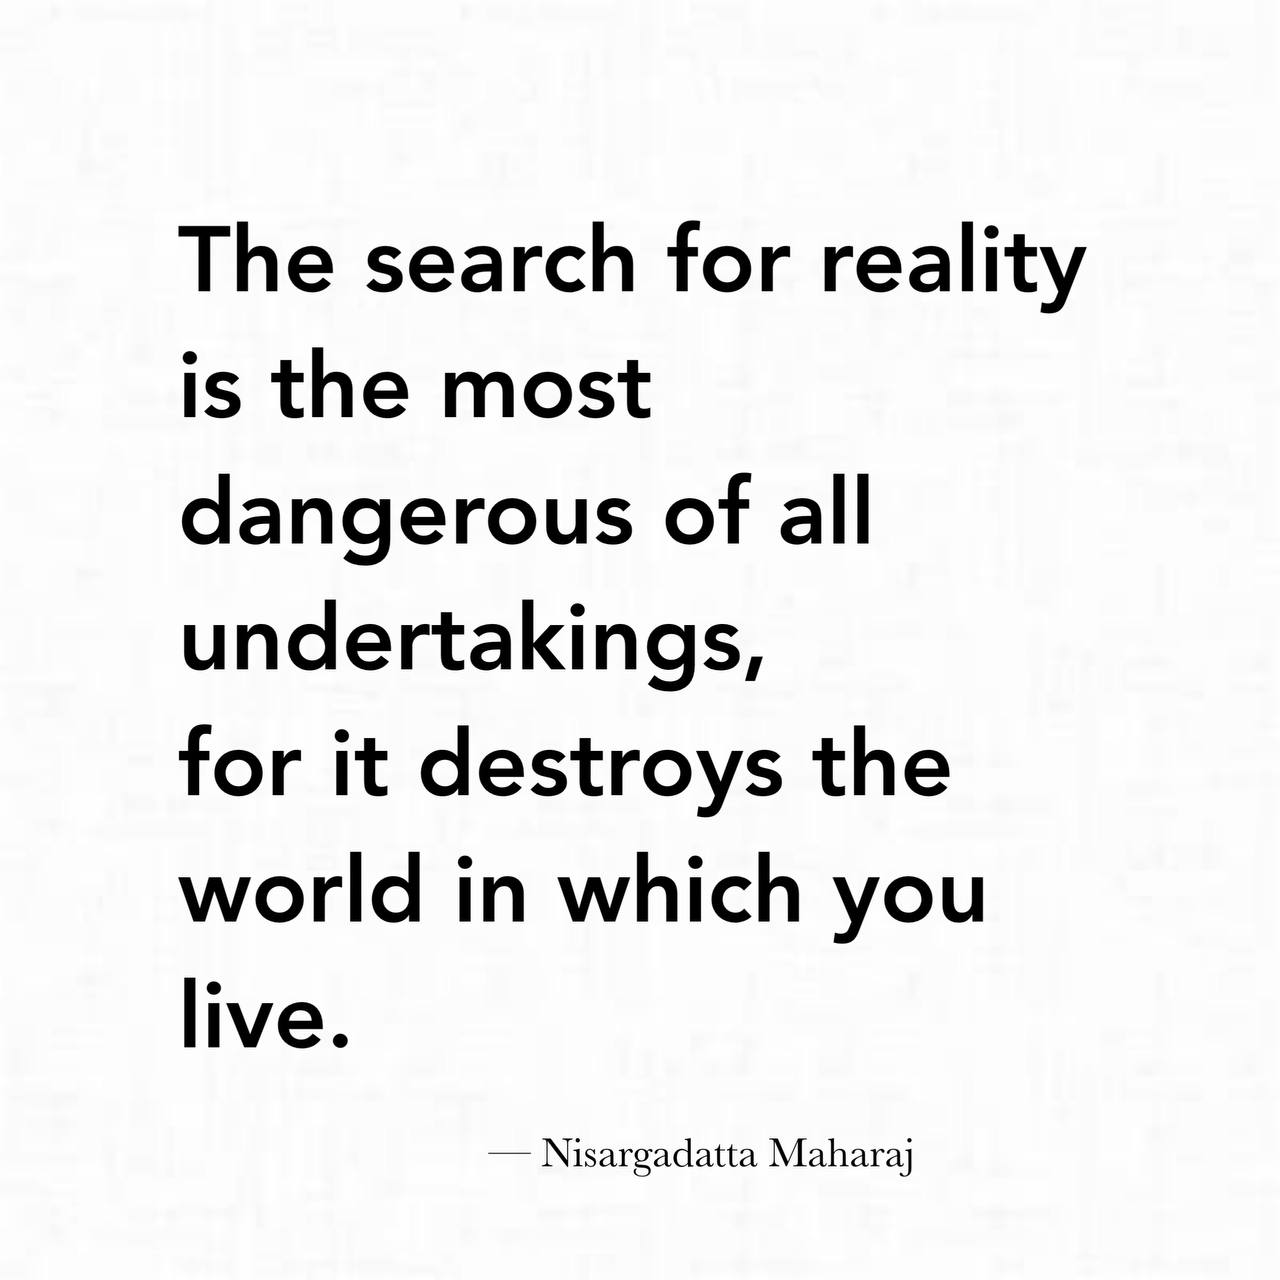 the search for reality is the most dangerous of all undertakings, for it destroys the world in which you live, nisargadatta maharaj